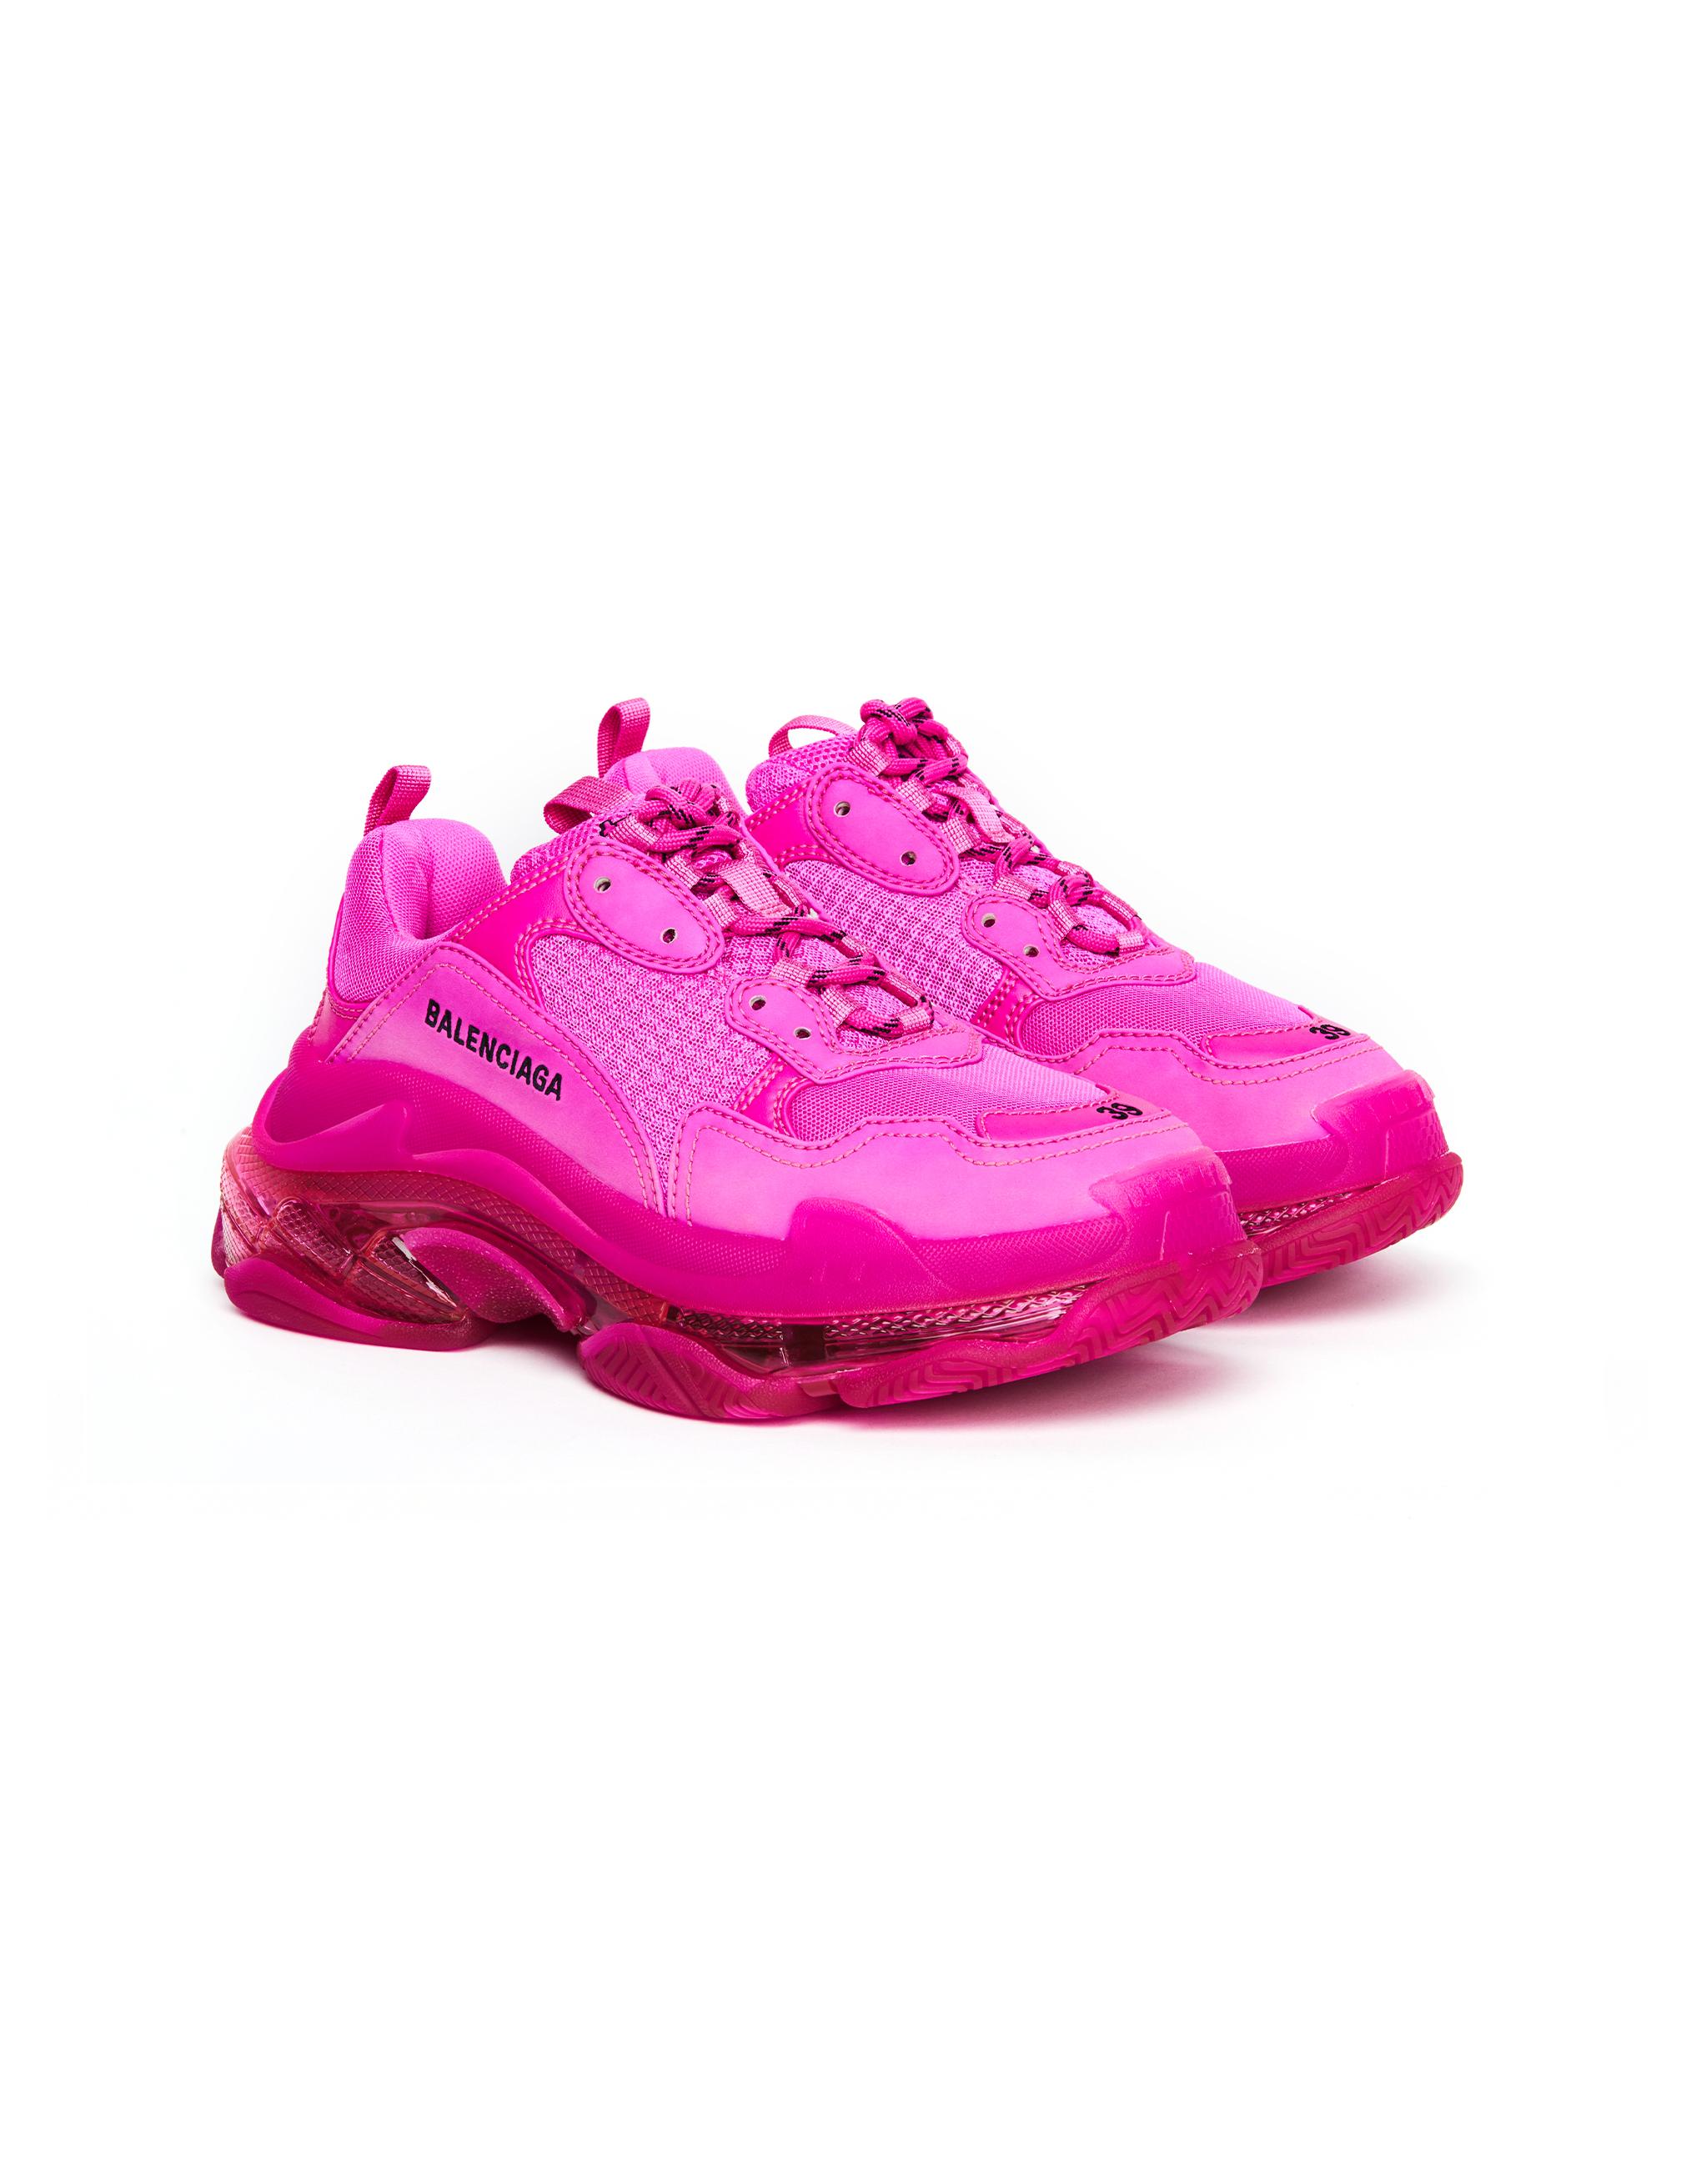 Balenciaga Triple S Sneaker in Pink/Pink Neon (Pink) - Save 37% - Lyst